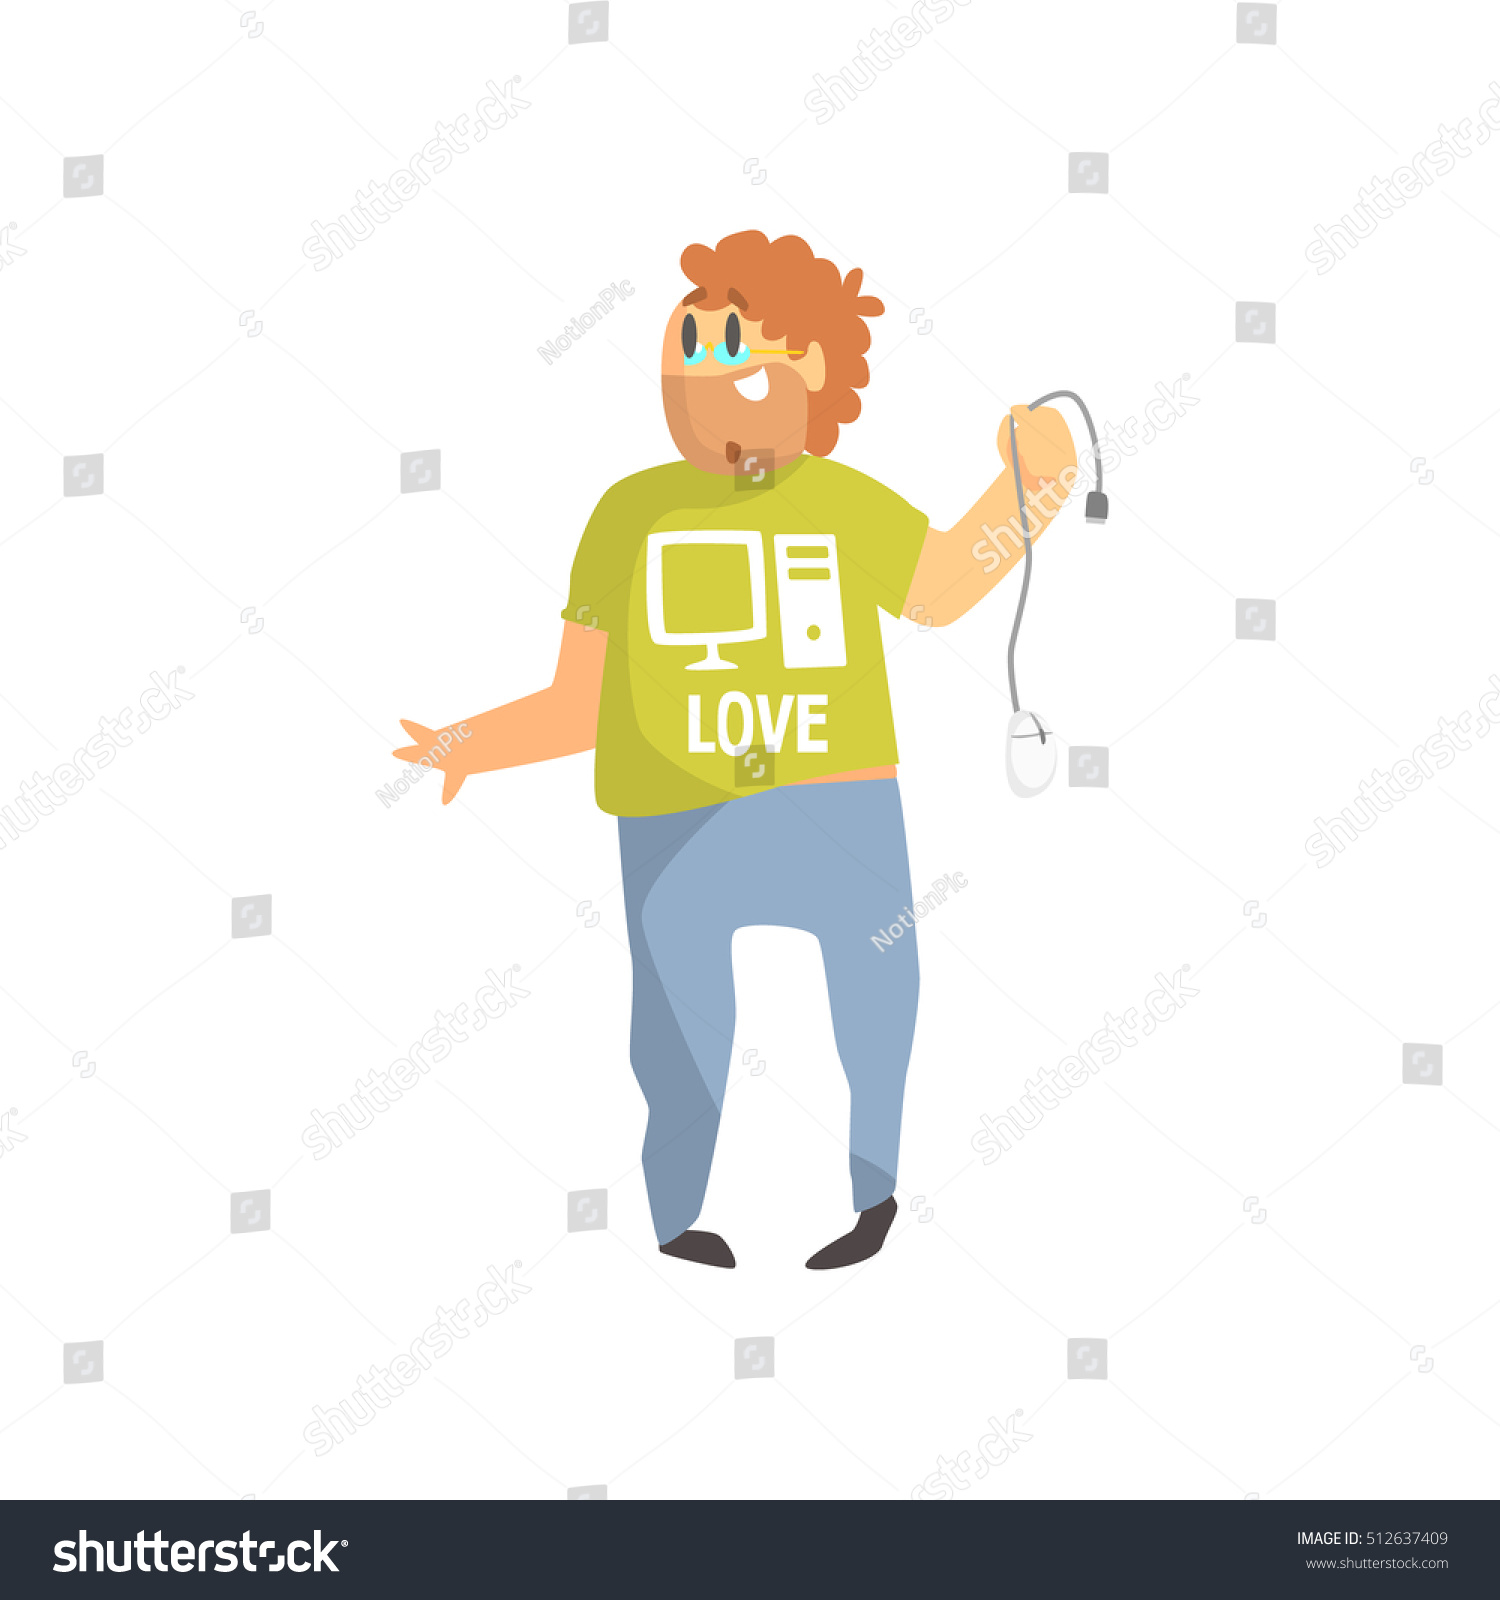 Programmer Holding Wire Funny Character Stock Vector 512637409 ...